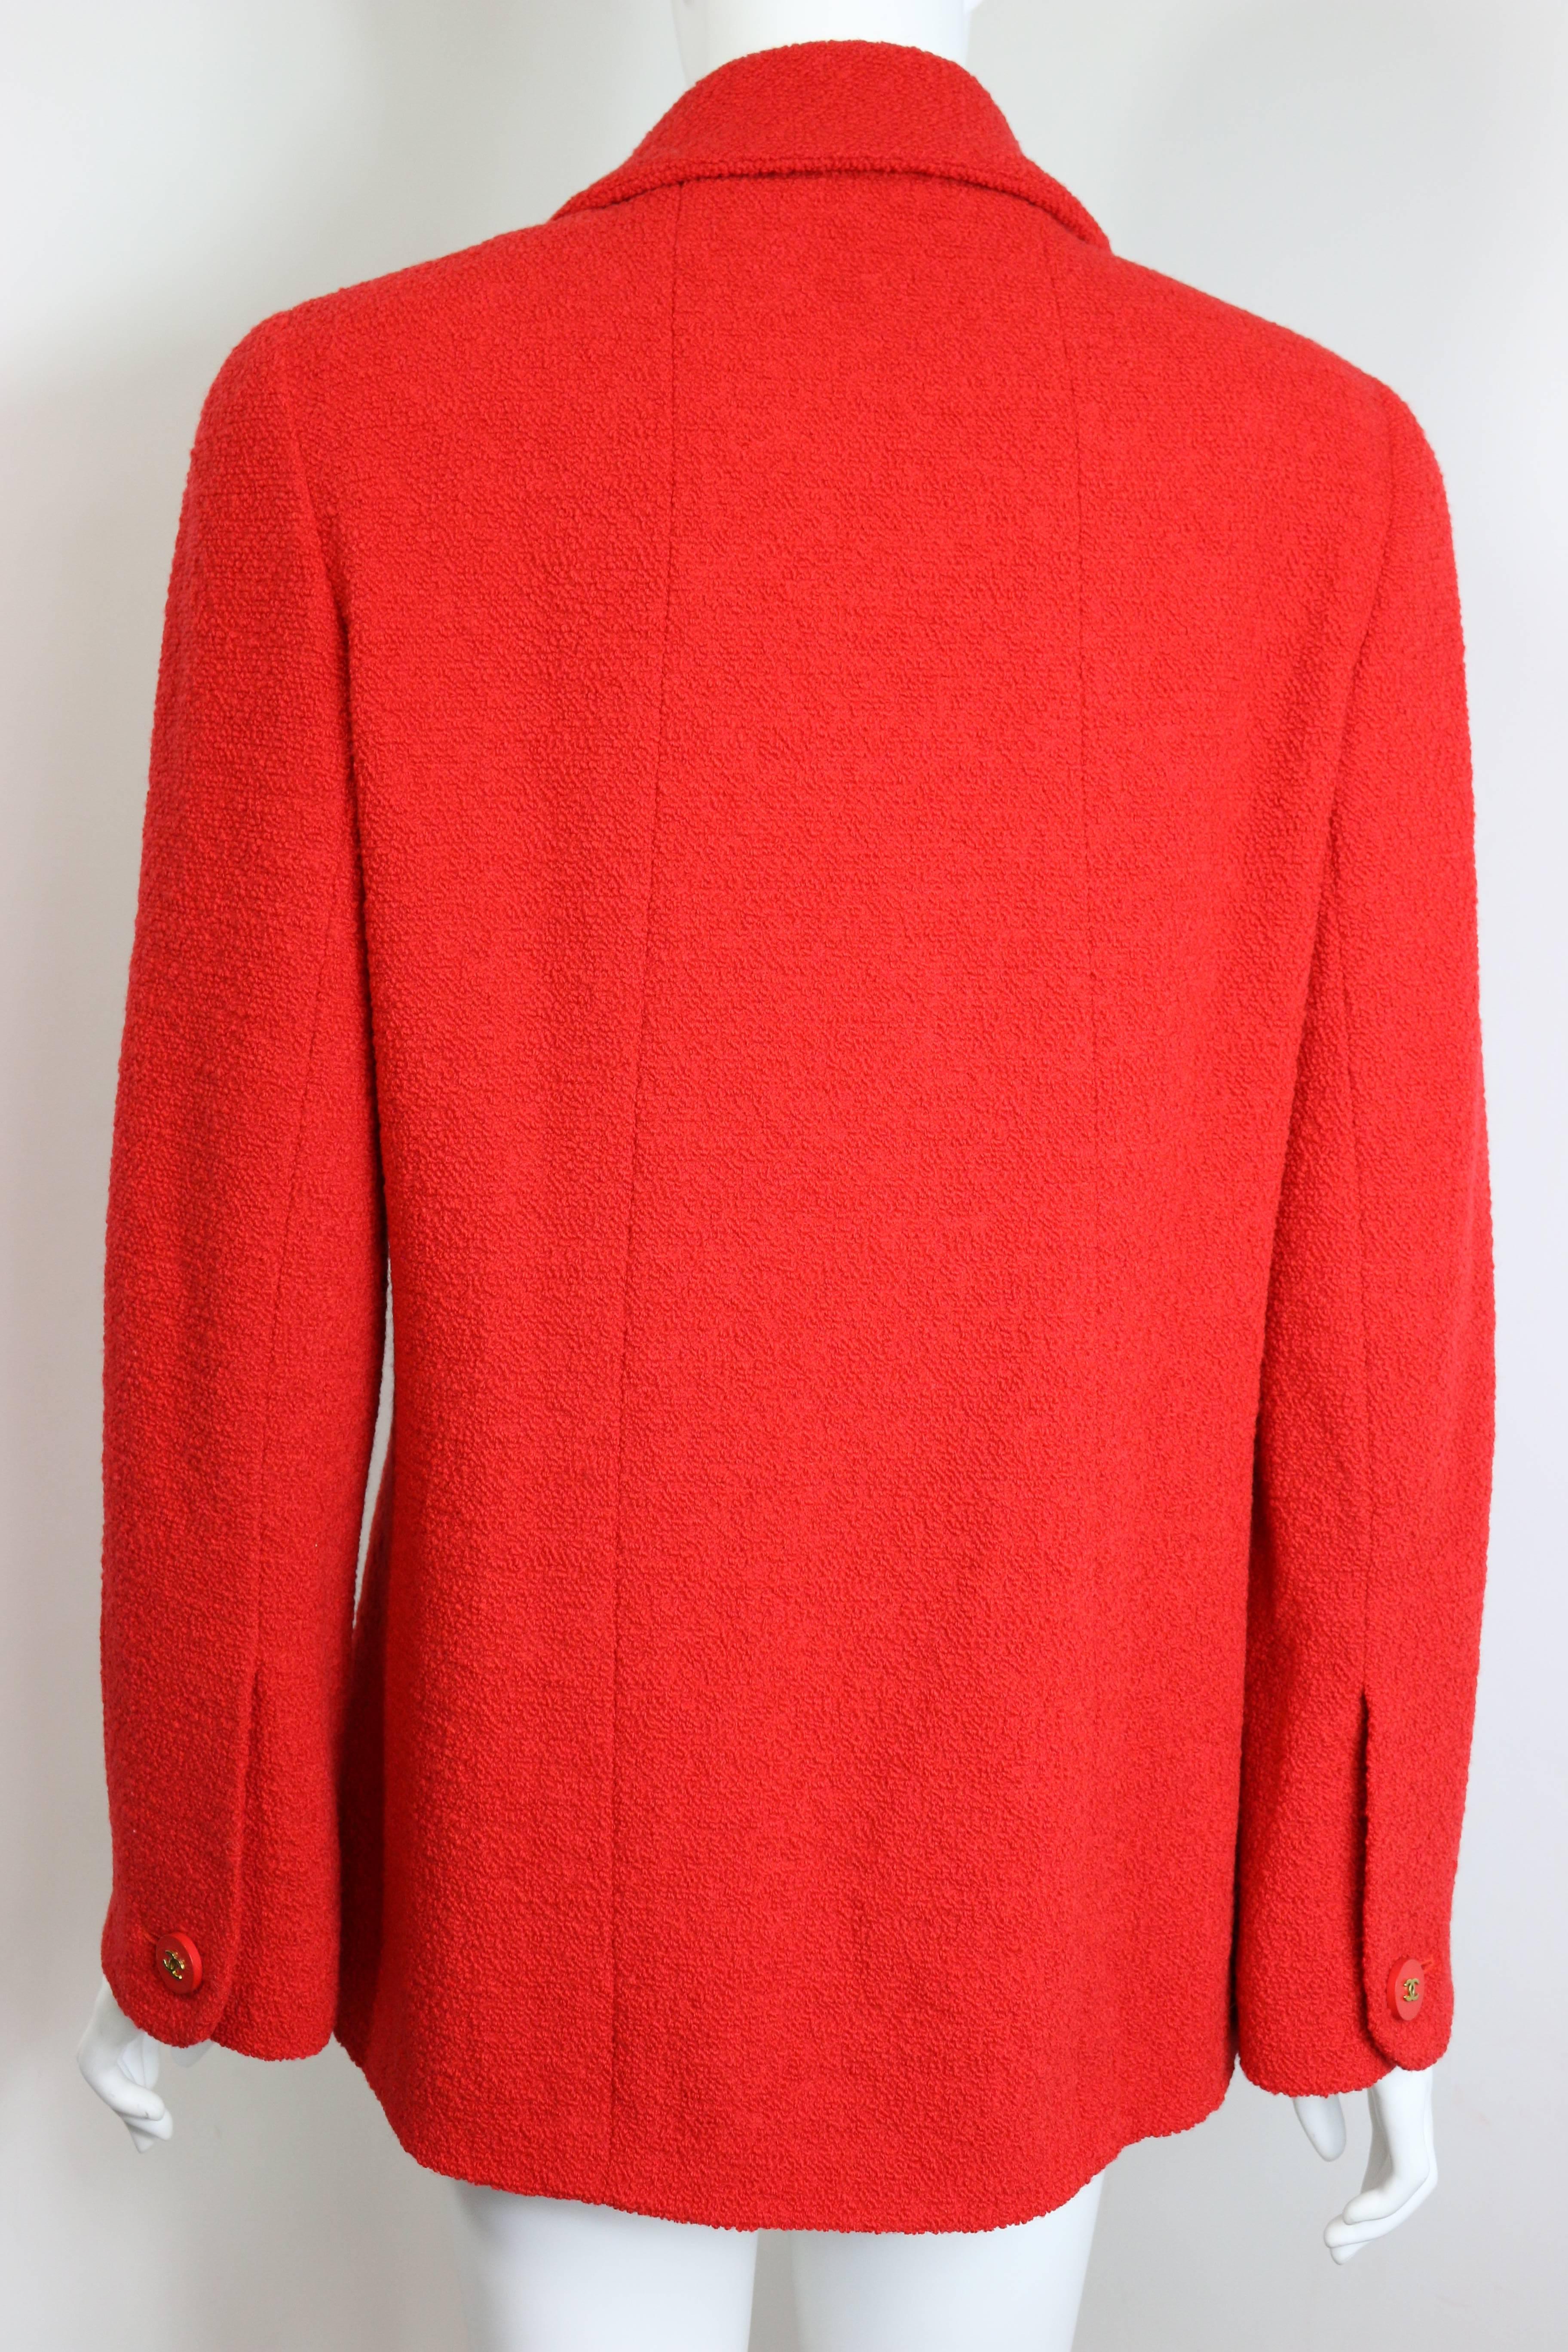 Women's or Men's Chanel Red Wool Jacket (Unworn With Original Tag) For Sale